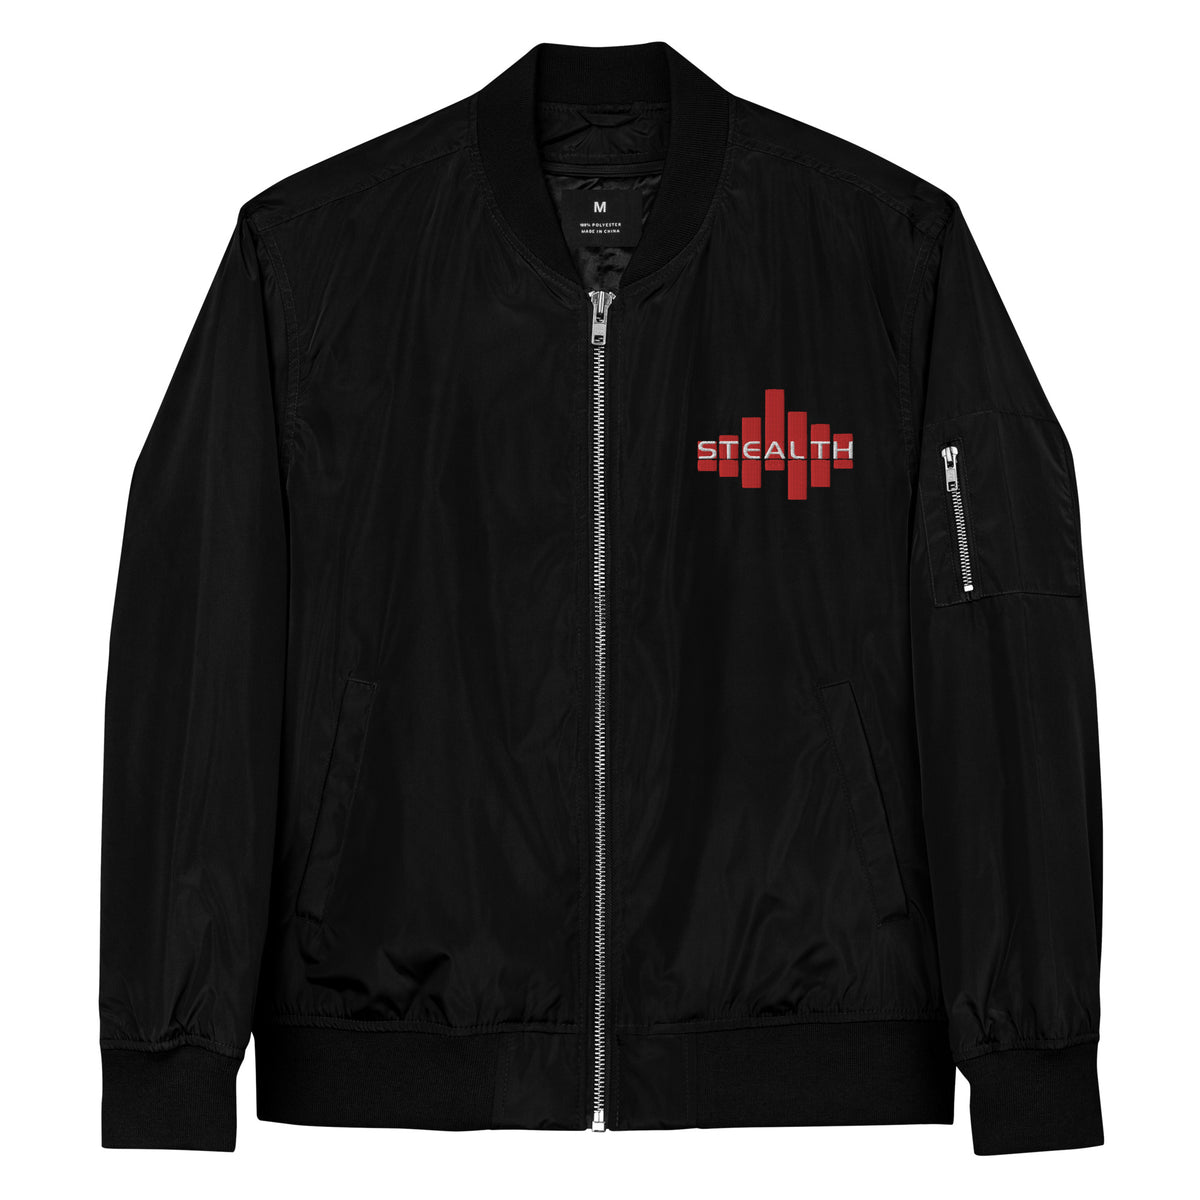 Stealth Premium recycled bomber jacket